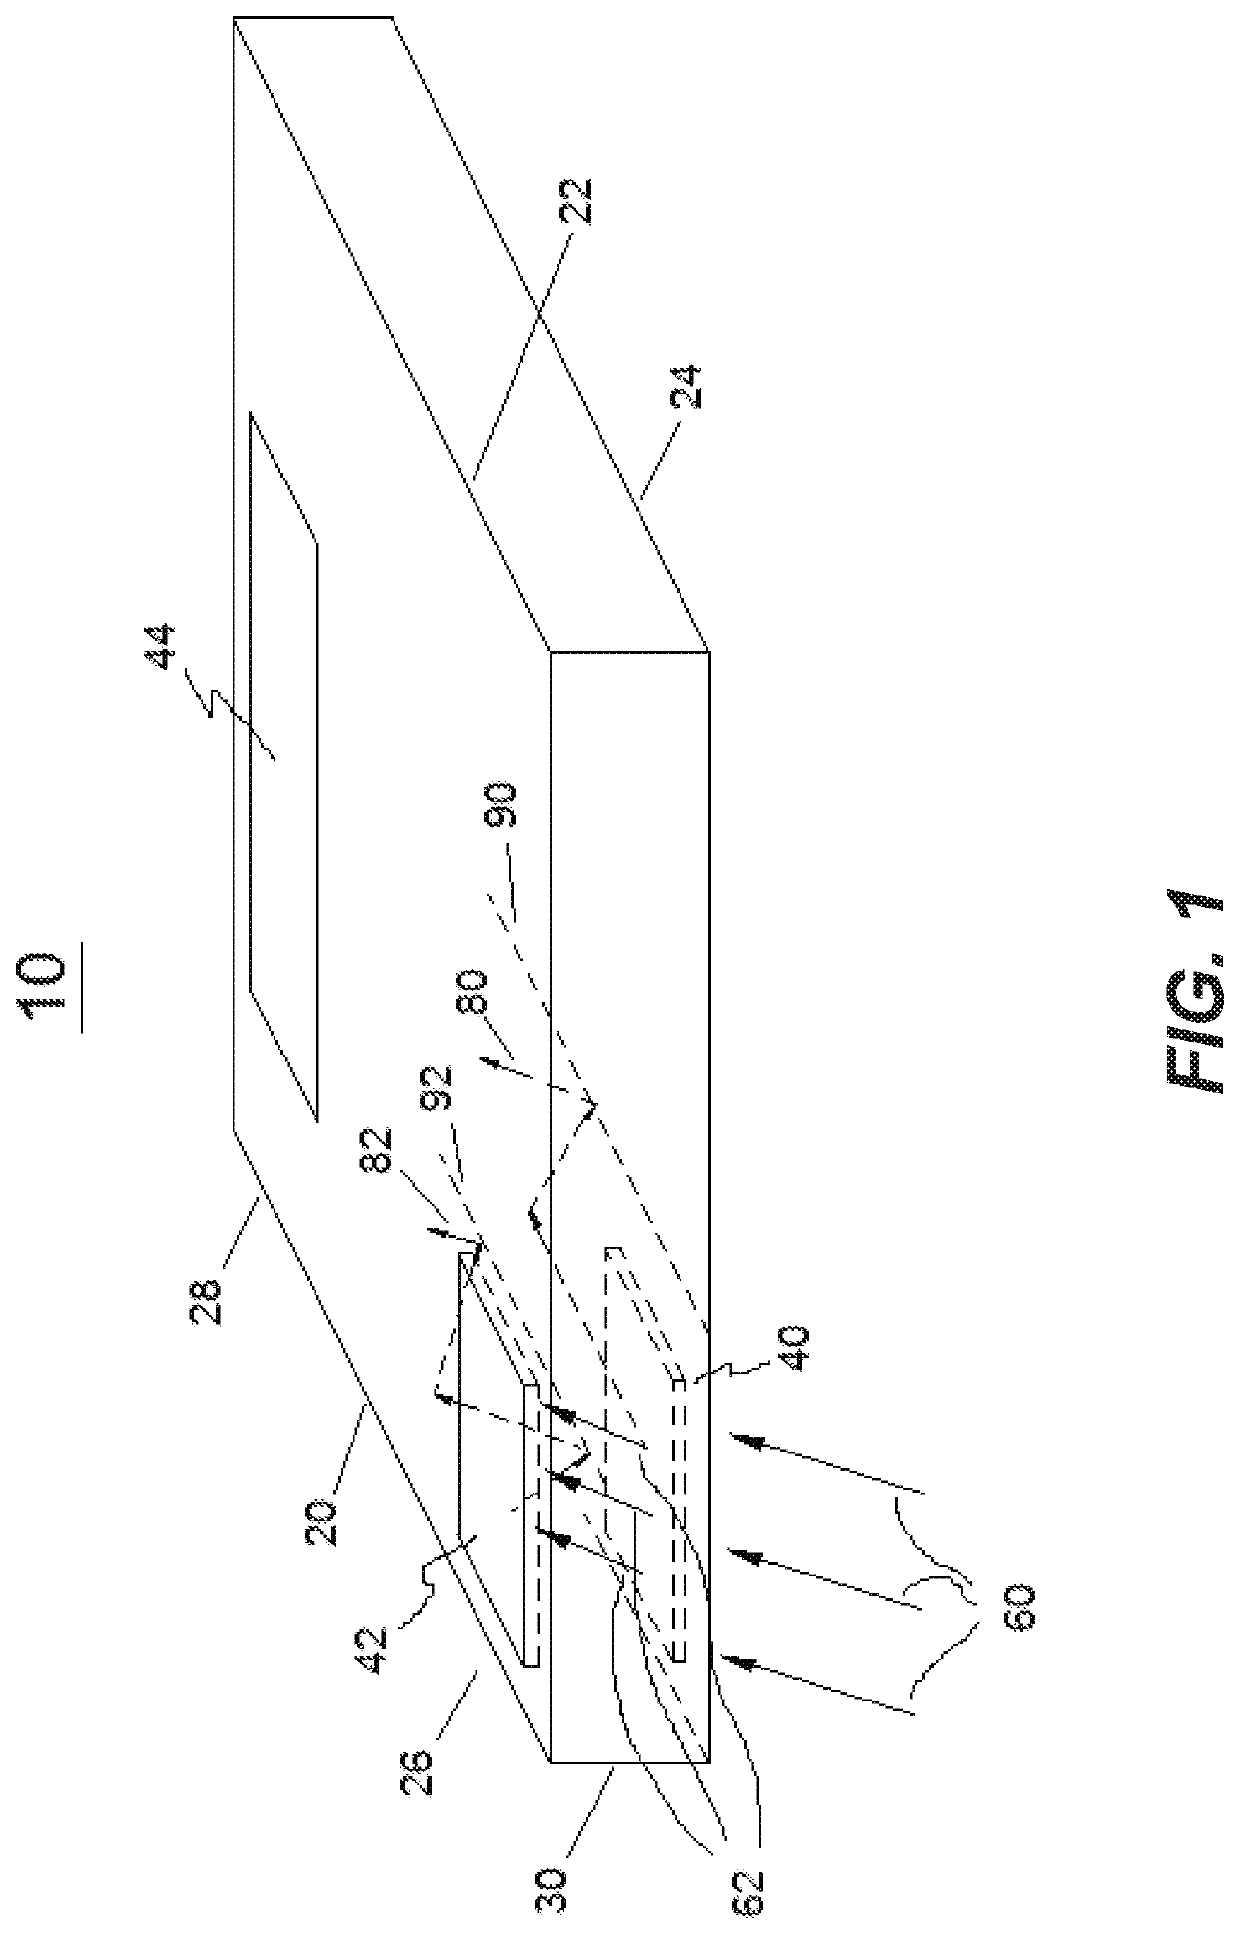 Multi-channel waveguide with reduced crosstalk